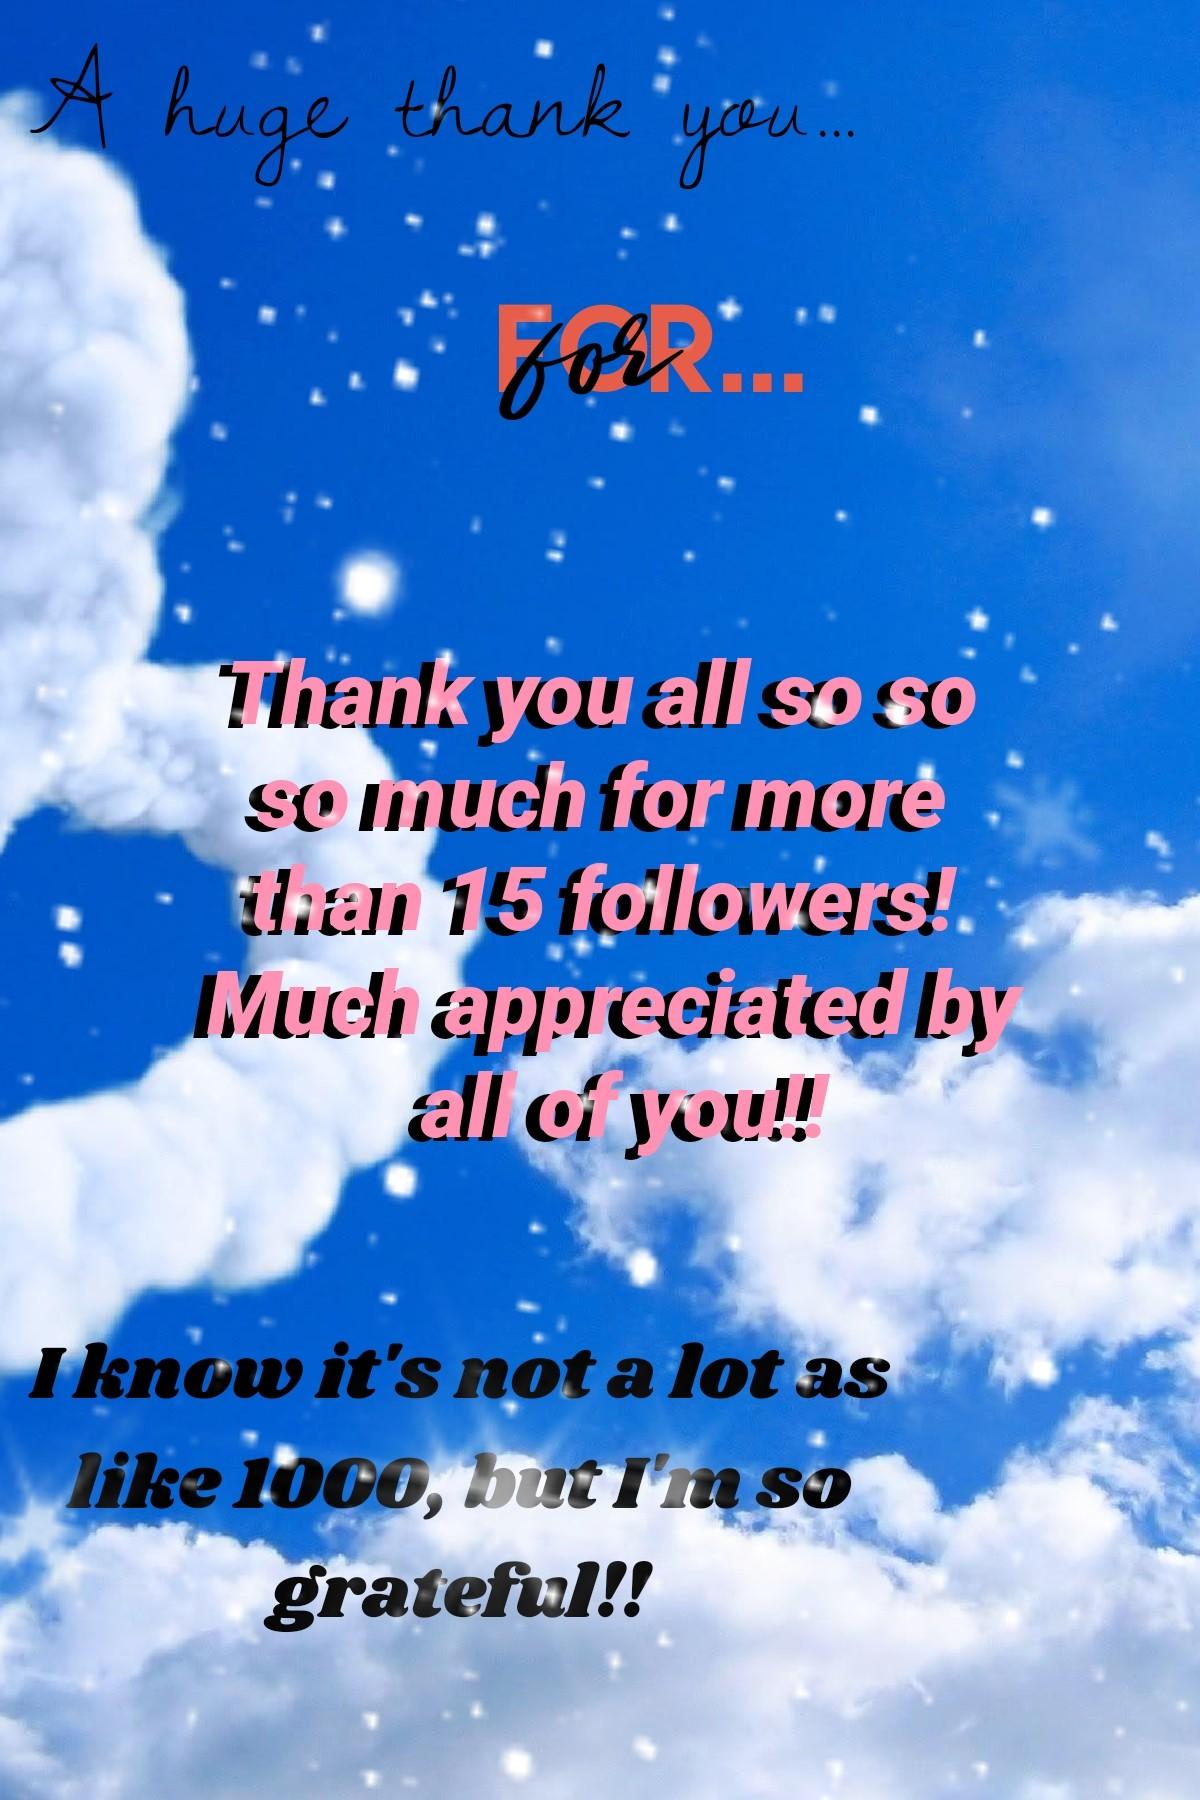 Thank you all so much for more than 15 followers!! 🥳 I appreciate it so much and I'm really thankful for it. 💞  